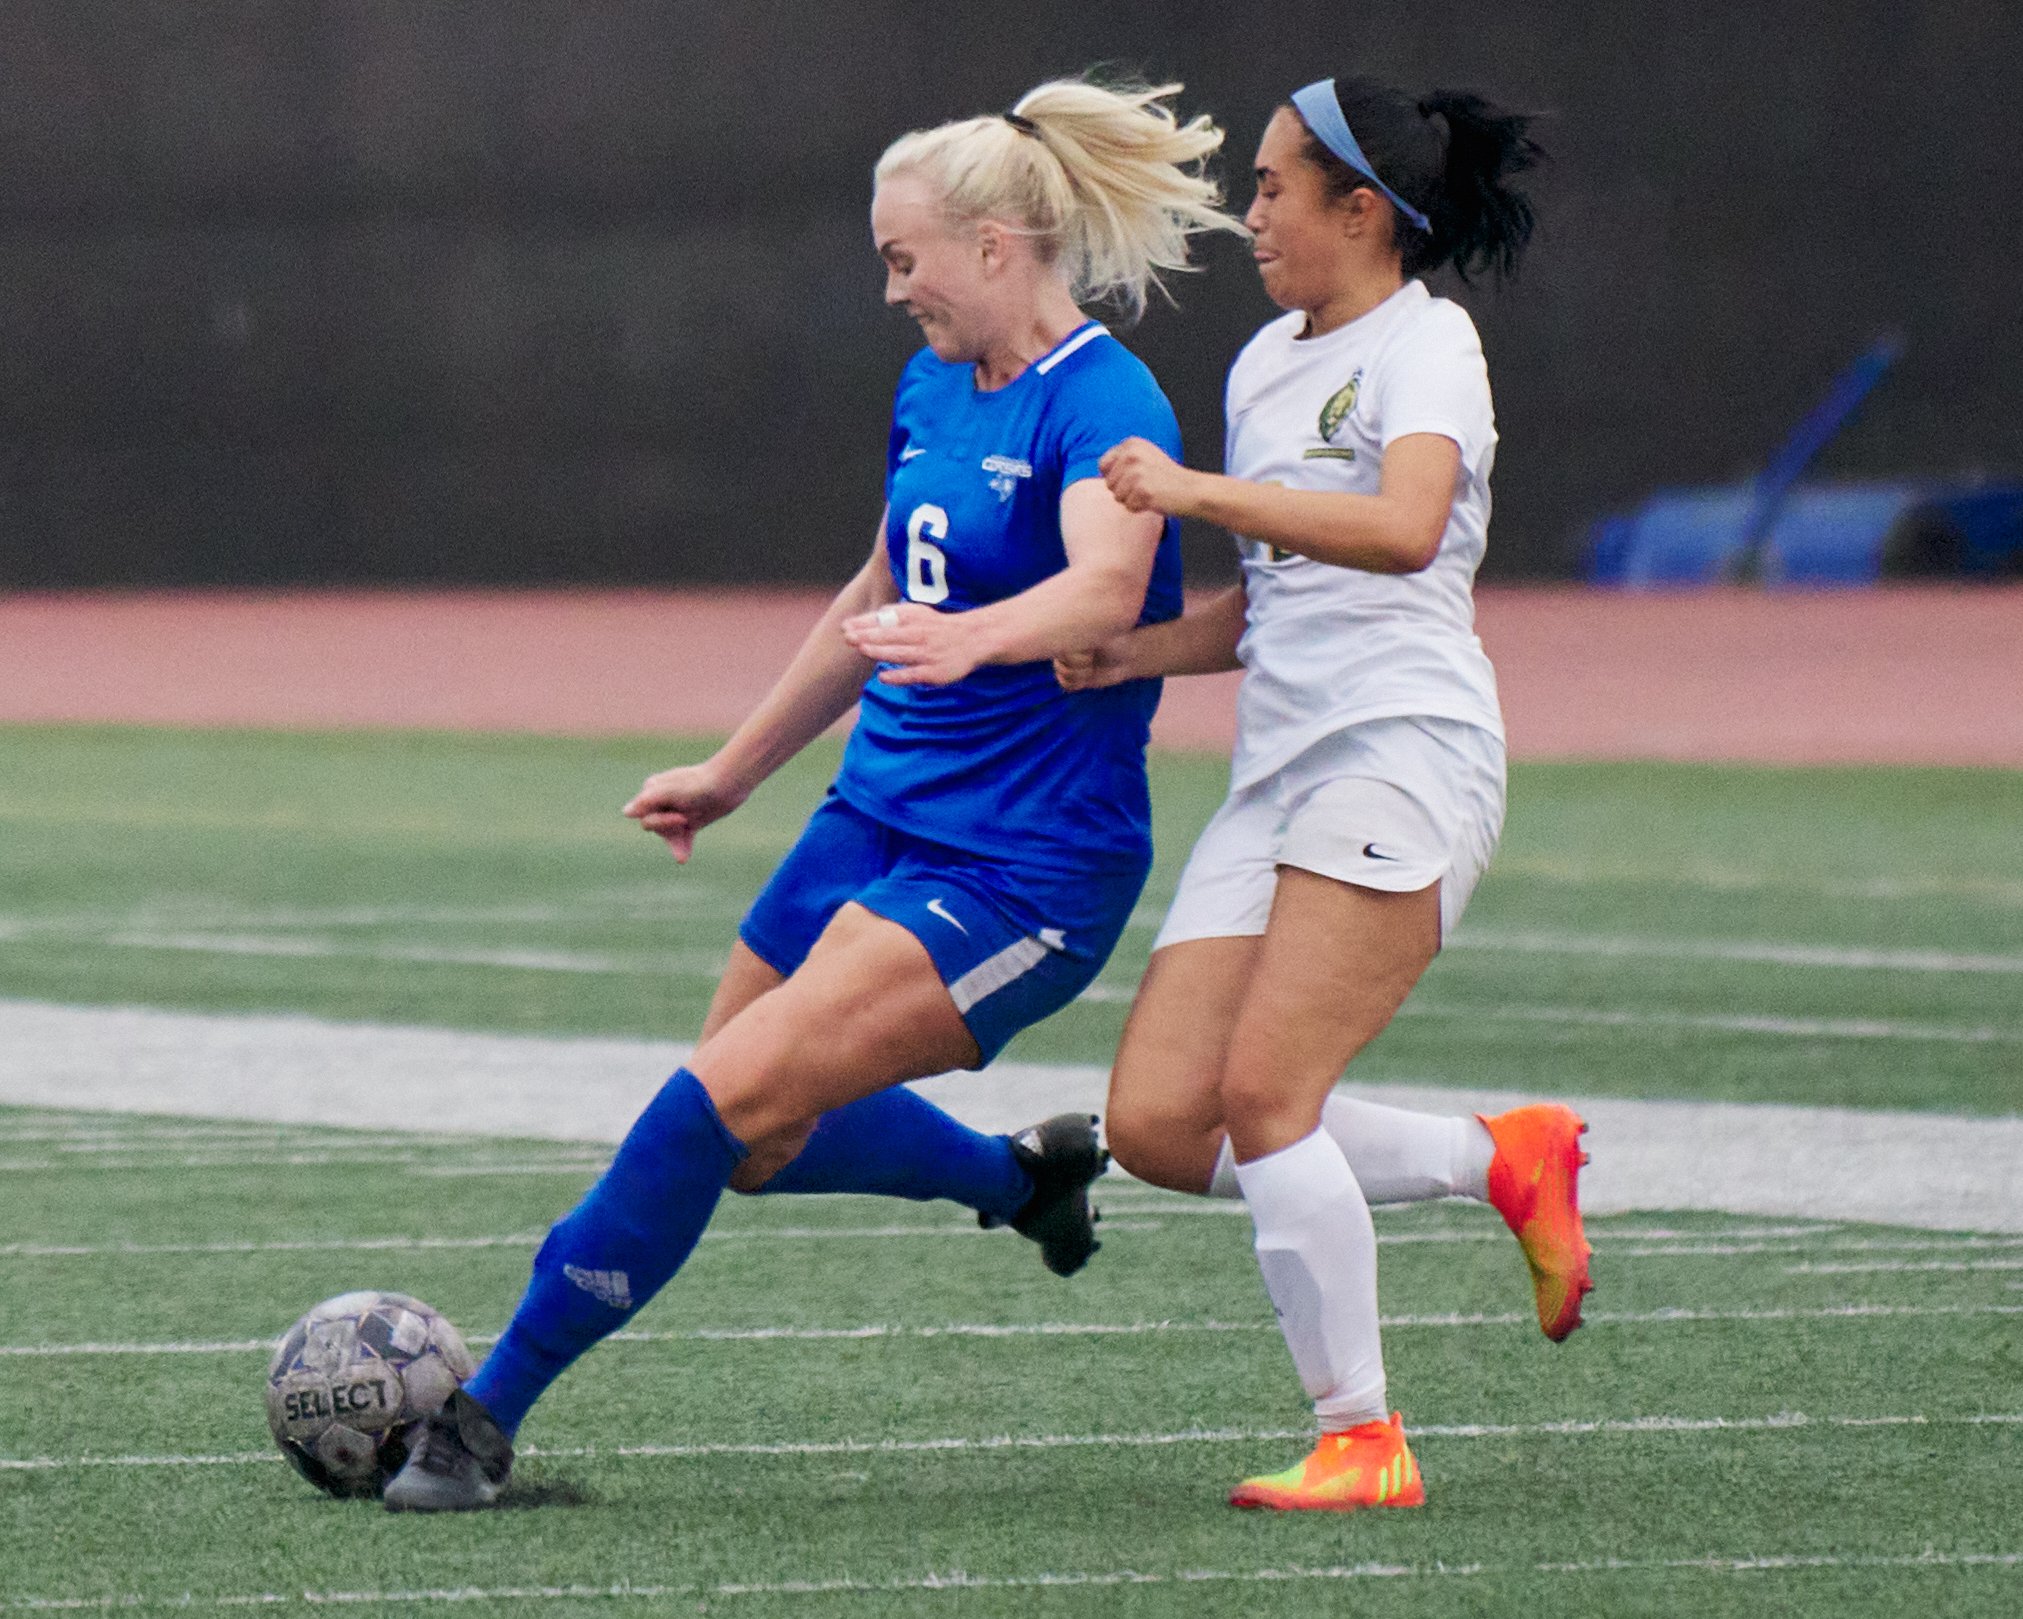  Santa Monica College Corsairs' Mathilda Isaksson and Los Angeles Valley College Monarchs' Katherine Lopez during the women's soccer match on Tuesday, Nov. 1, 2022, at Corsair Field in Santa Monica, Calif. The Corsairs won 2-1. (Nicholas McCall | The